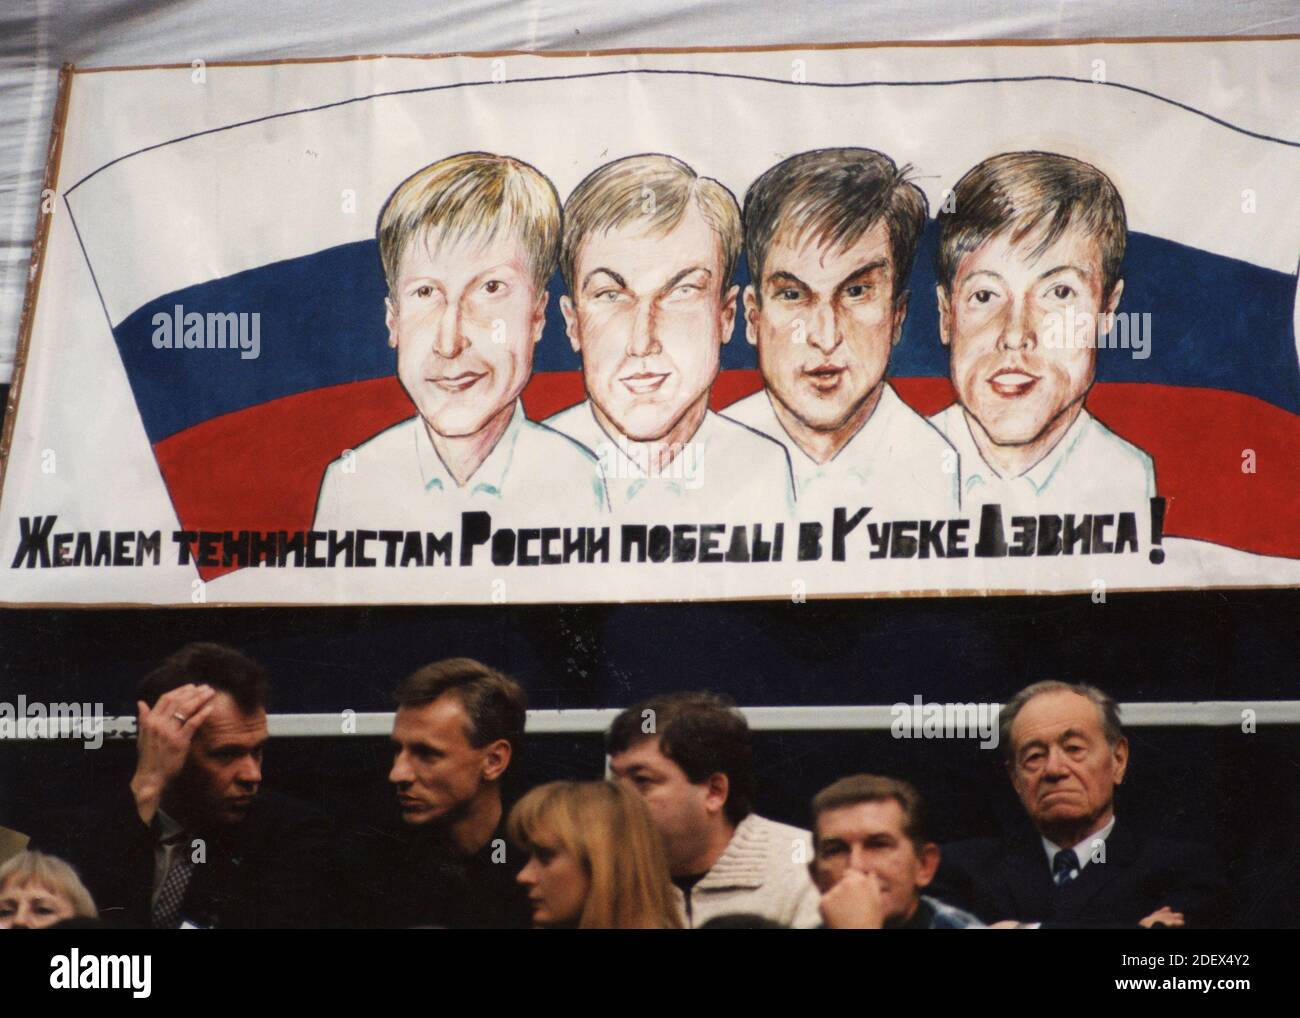 Russian supporters at the tennis match, 1990s Stock Photo